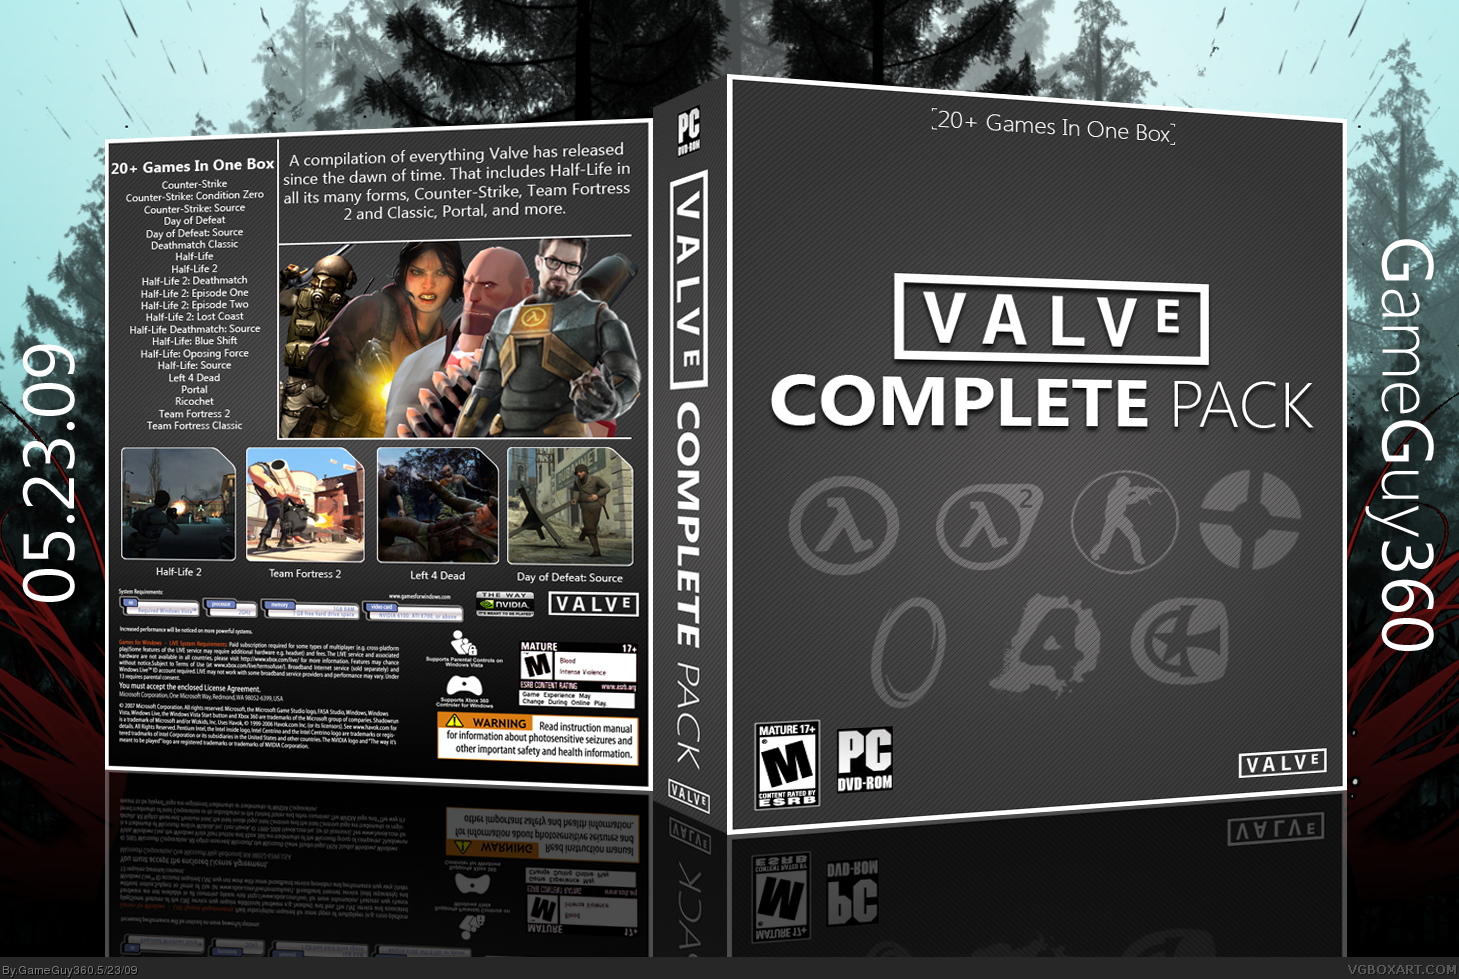 Valve Complete Pack box cover